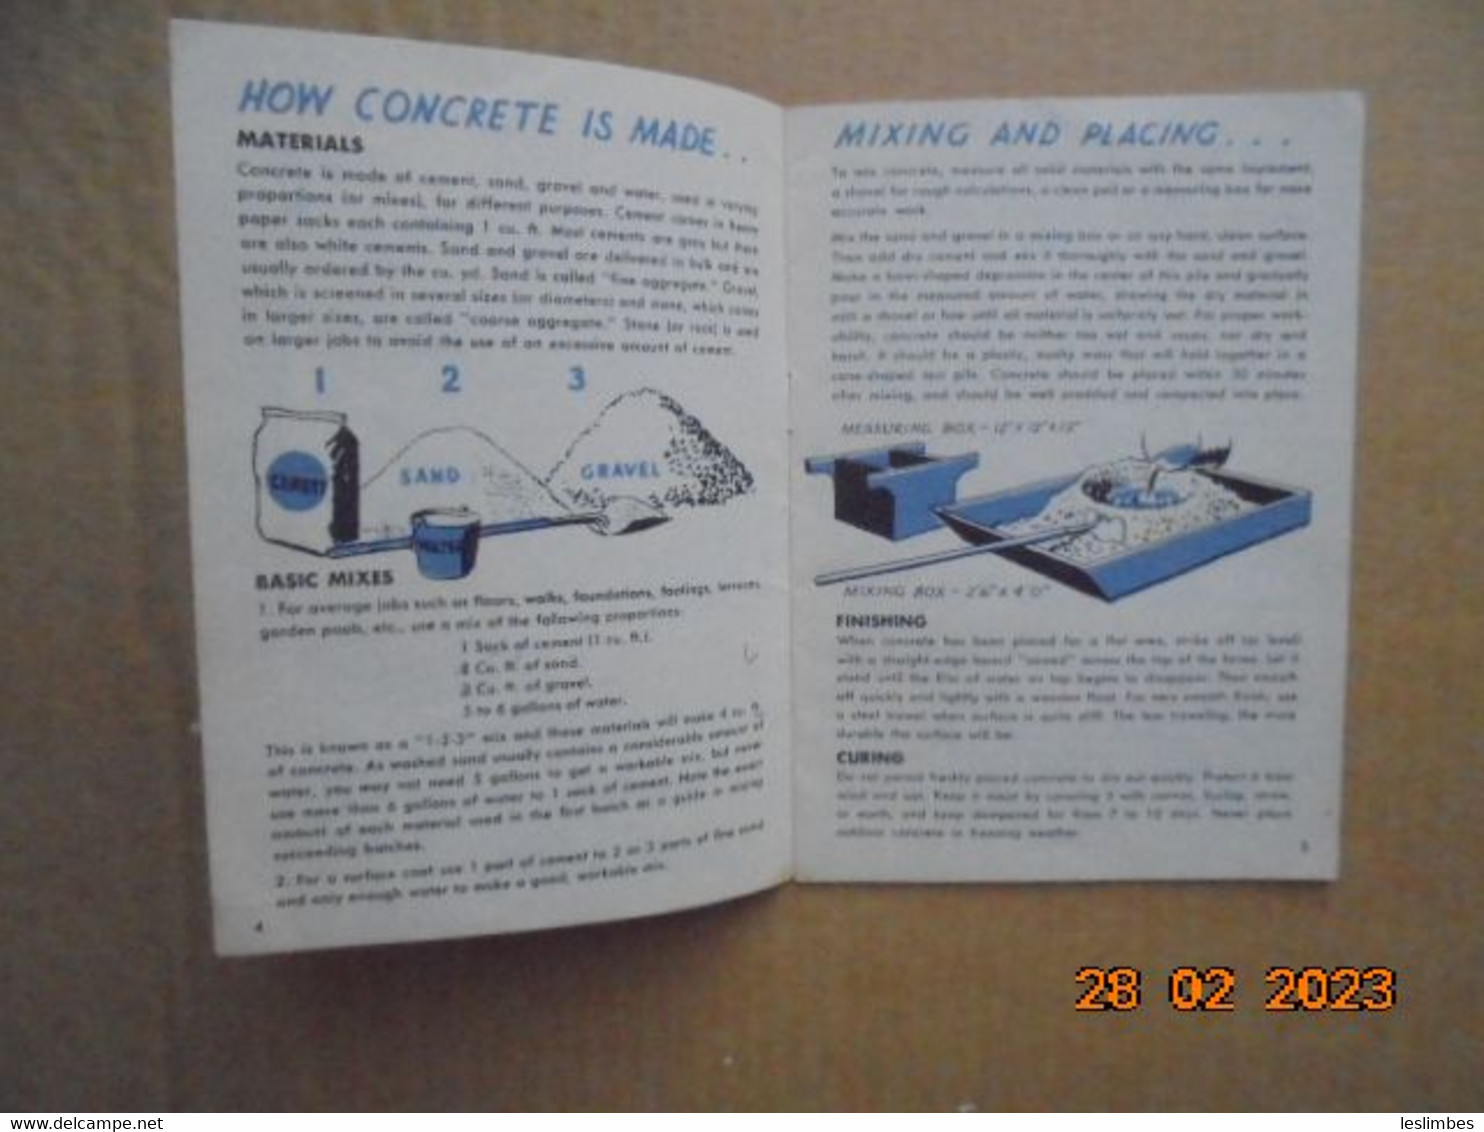 Concrete Ideas: How To Use Concrete Around The House By H. Wood. Mercer Publishing Co. 1953 - Bricolage